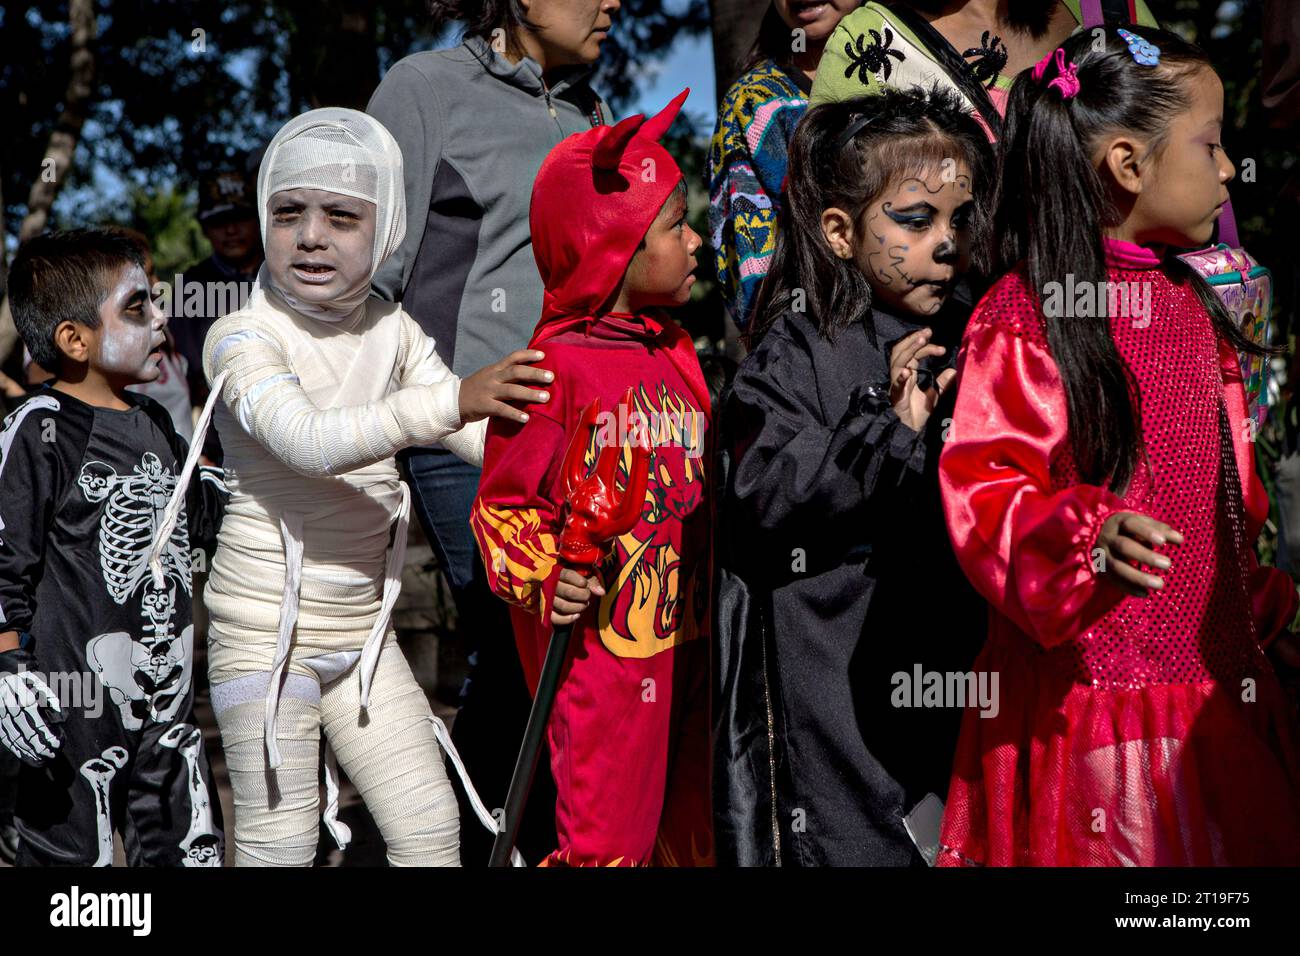 Children dressed in halloween costumes parade at the start of the Day of the Dead festival known in Spanish as Día de Muertos, October 30, 2013 in Oaxaca, Mexico. Stock Photo